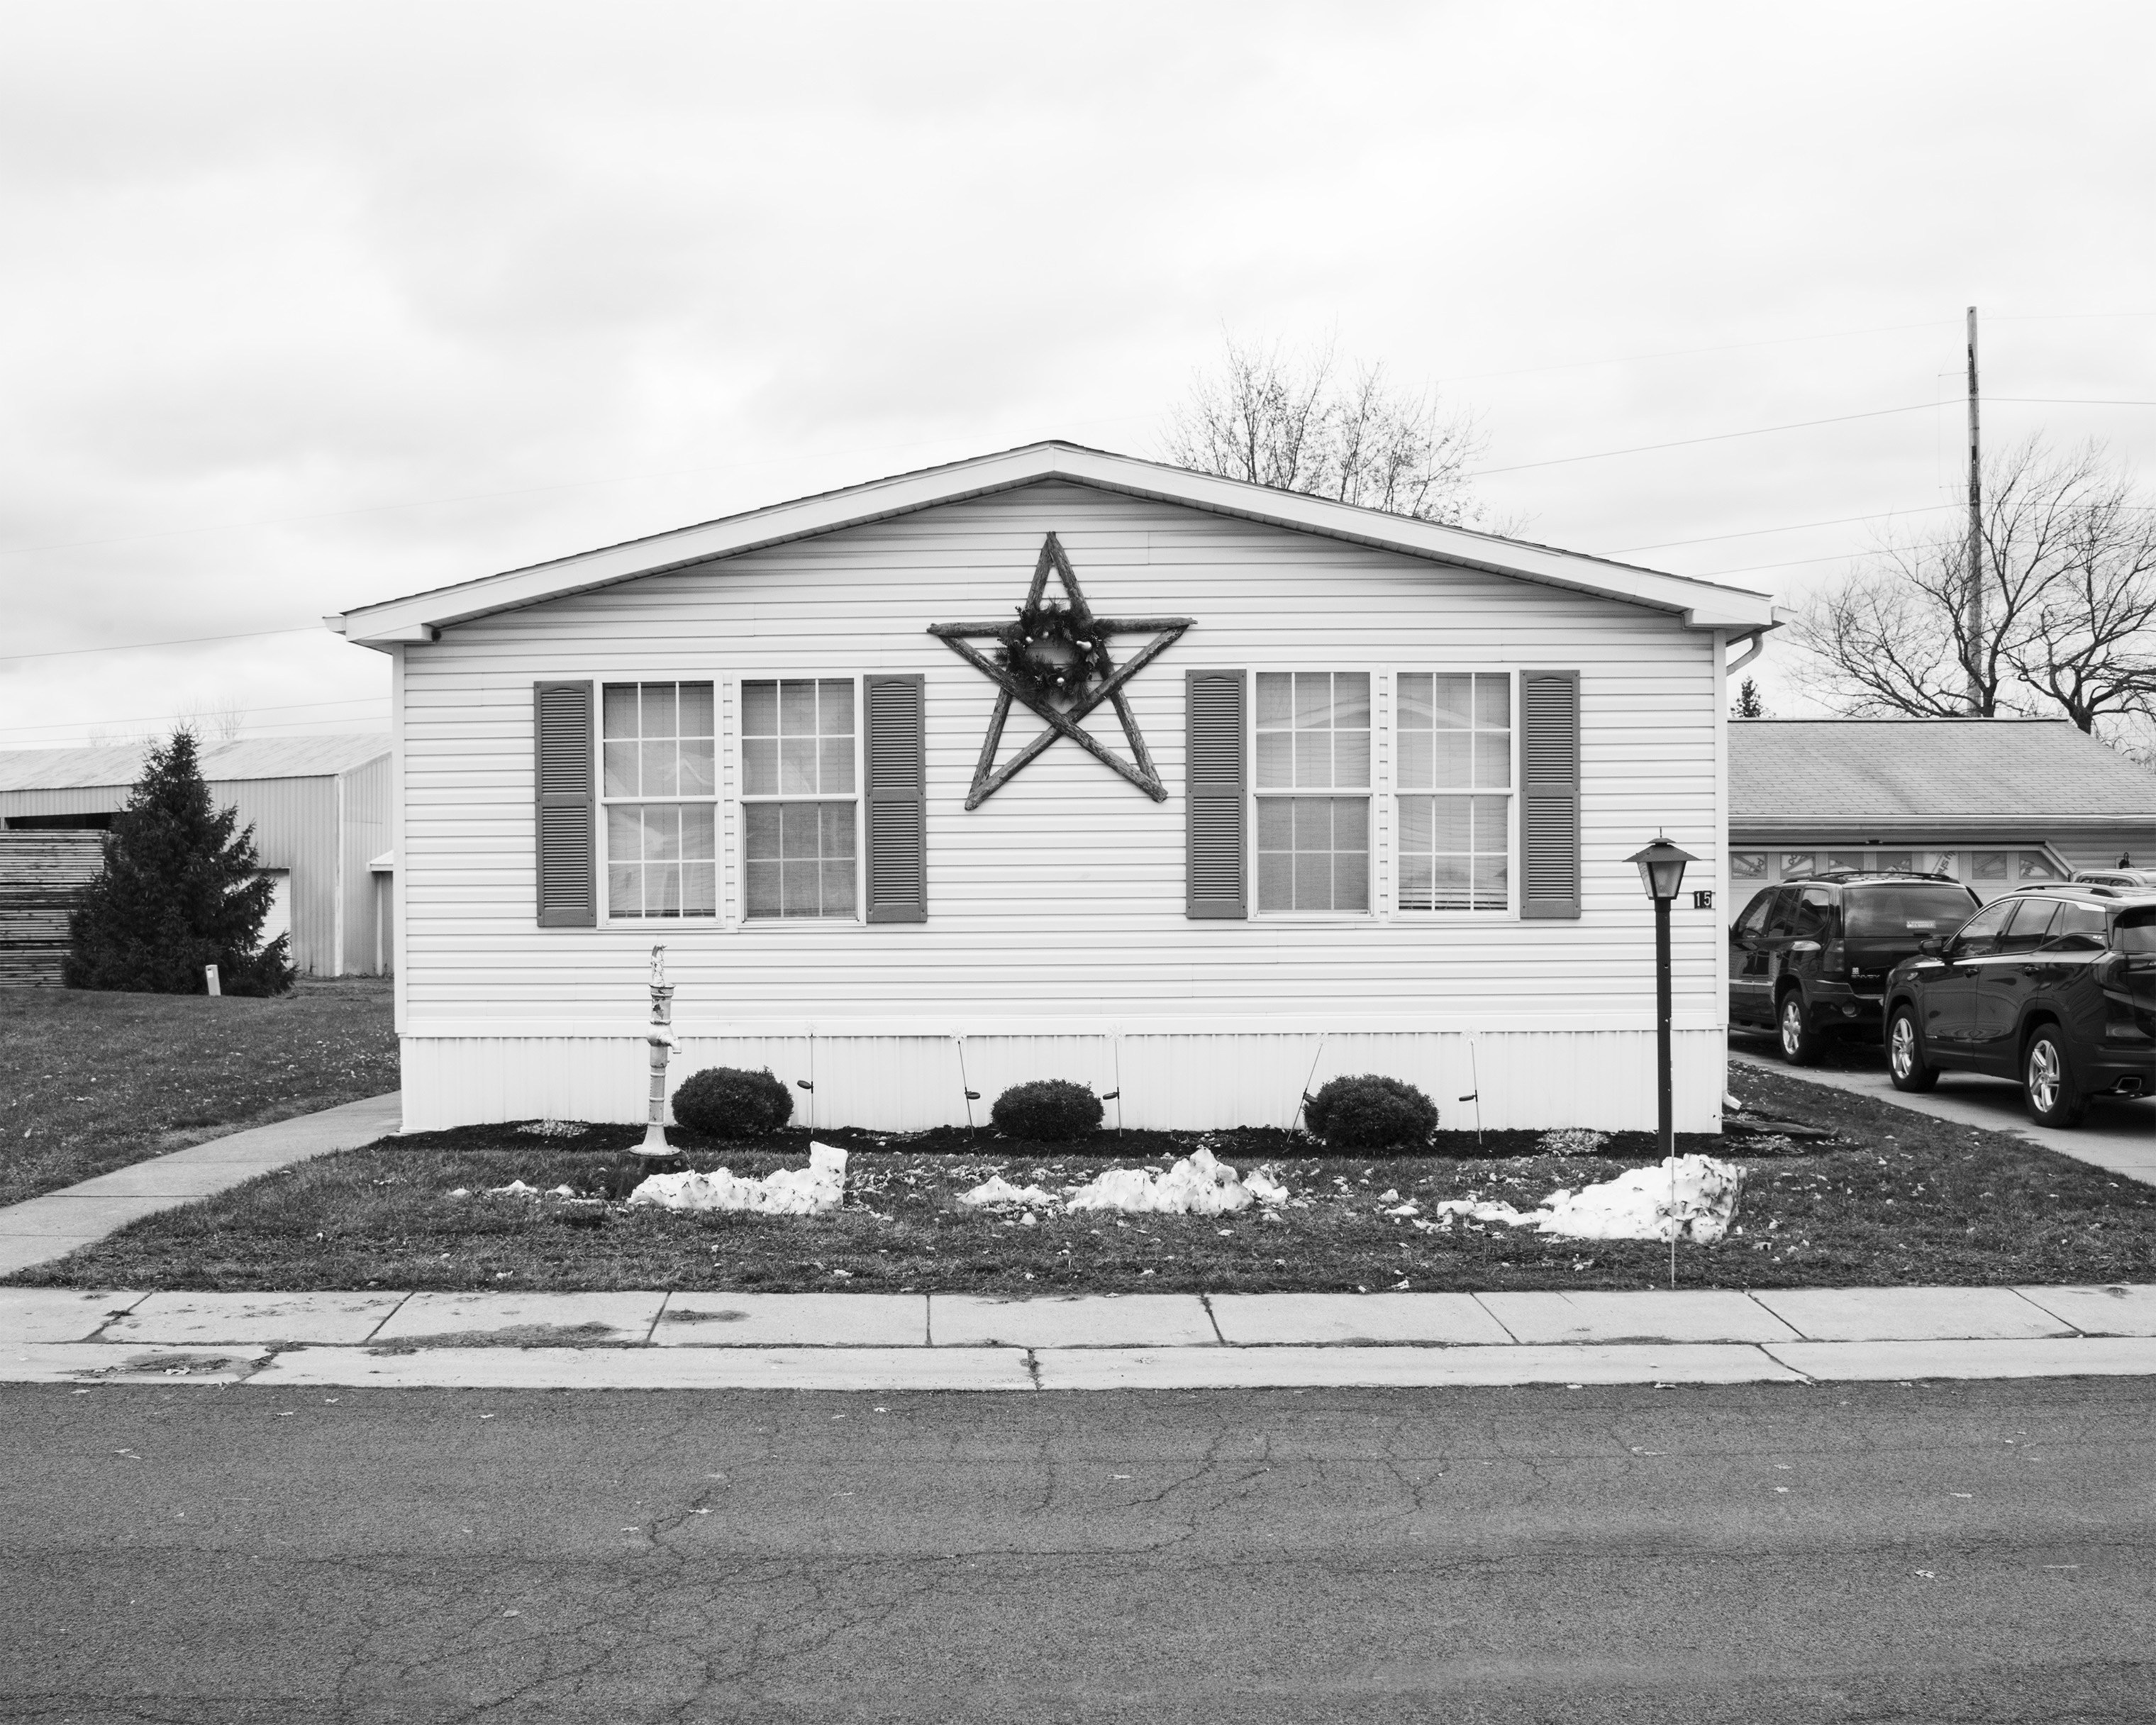 The exterior of Maribeth Sheedy's home in the Akron Manufactured Home Community (Shane Lavalette for TIME)